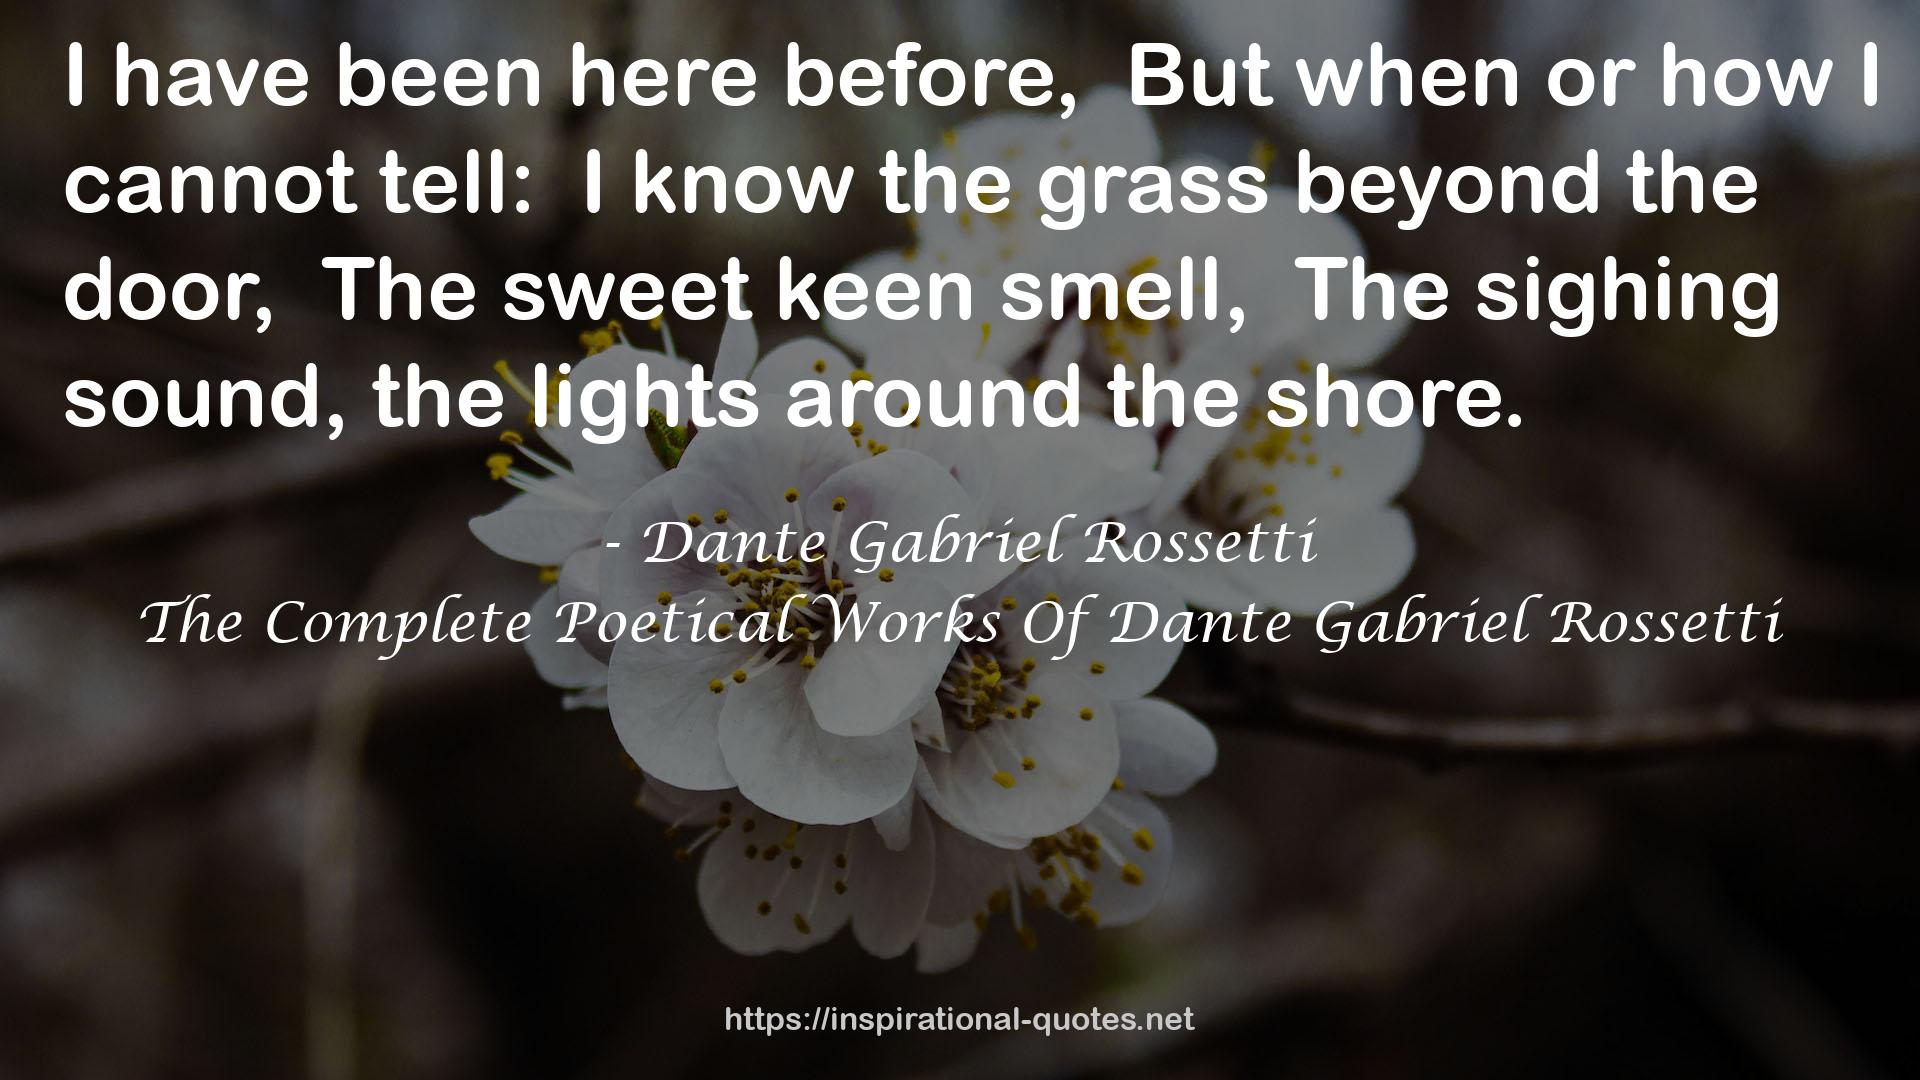 The Complete Poetical Works Of Dante Gabriel Rossetti QUOTES